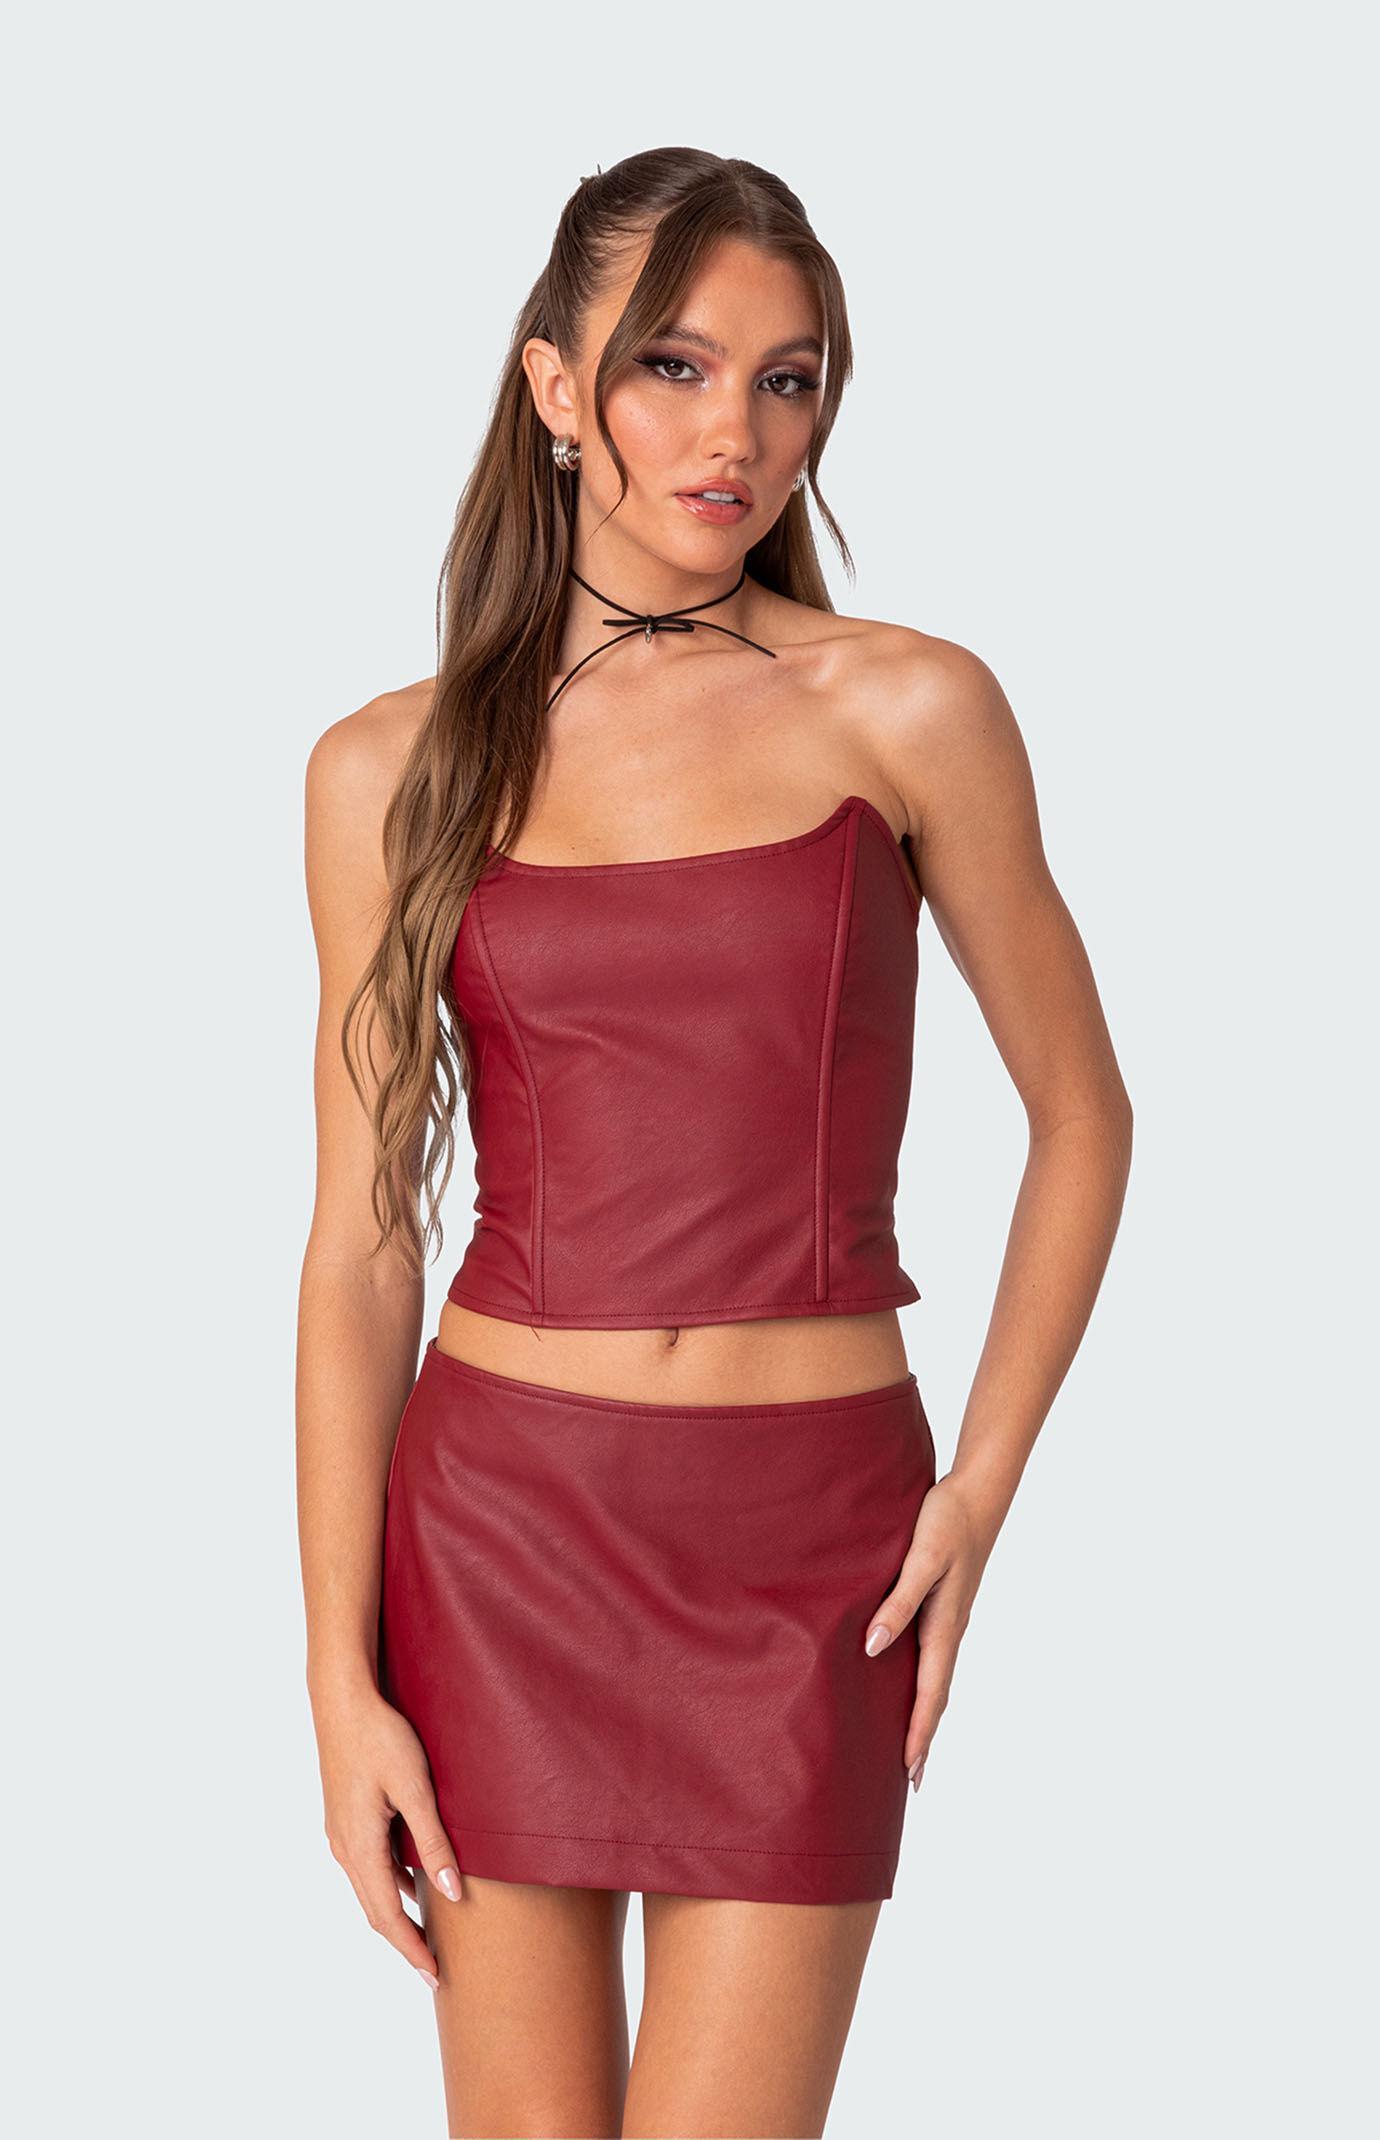 Edikted Women's Aster Faux Leather Corset Product Image